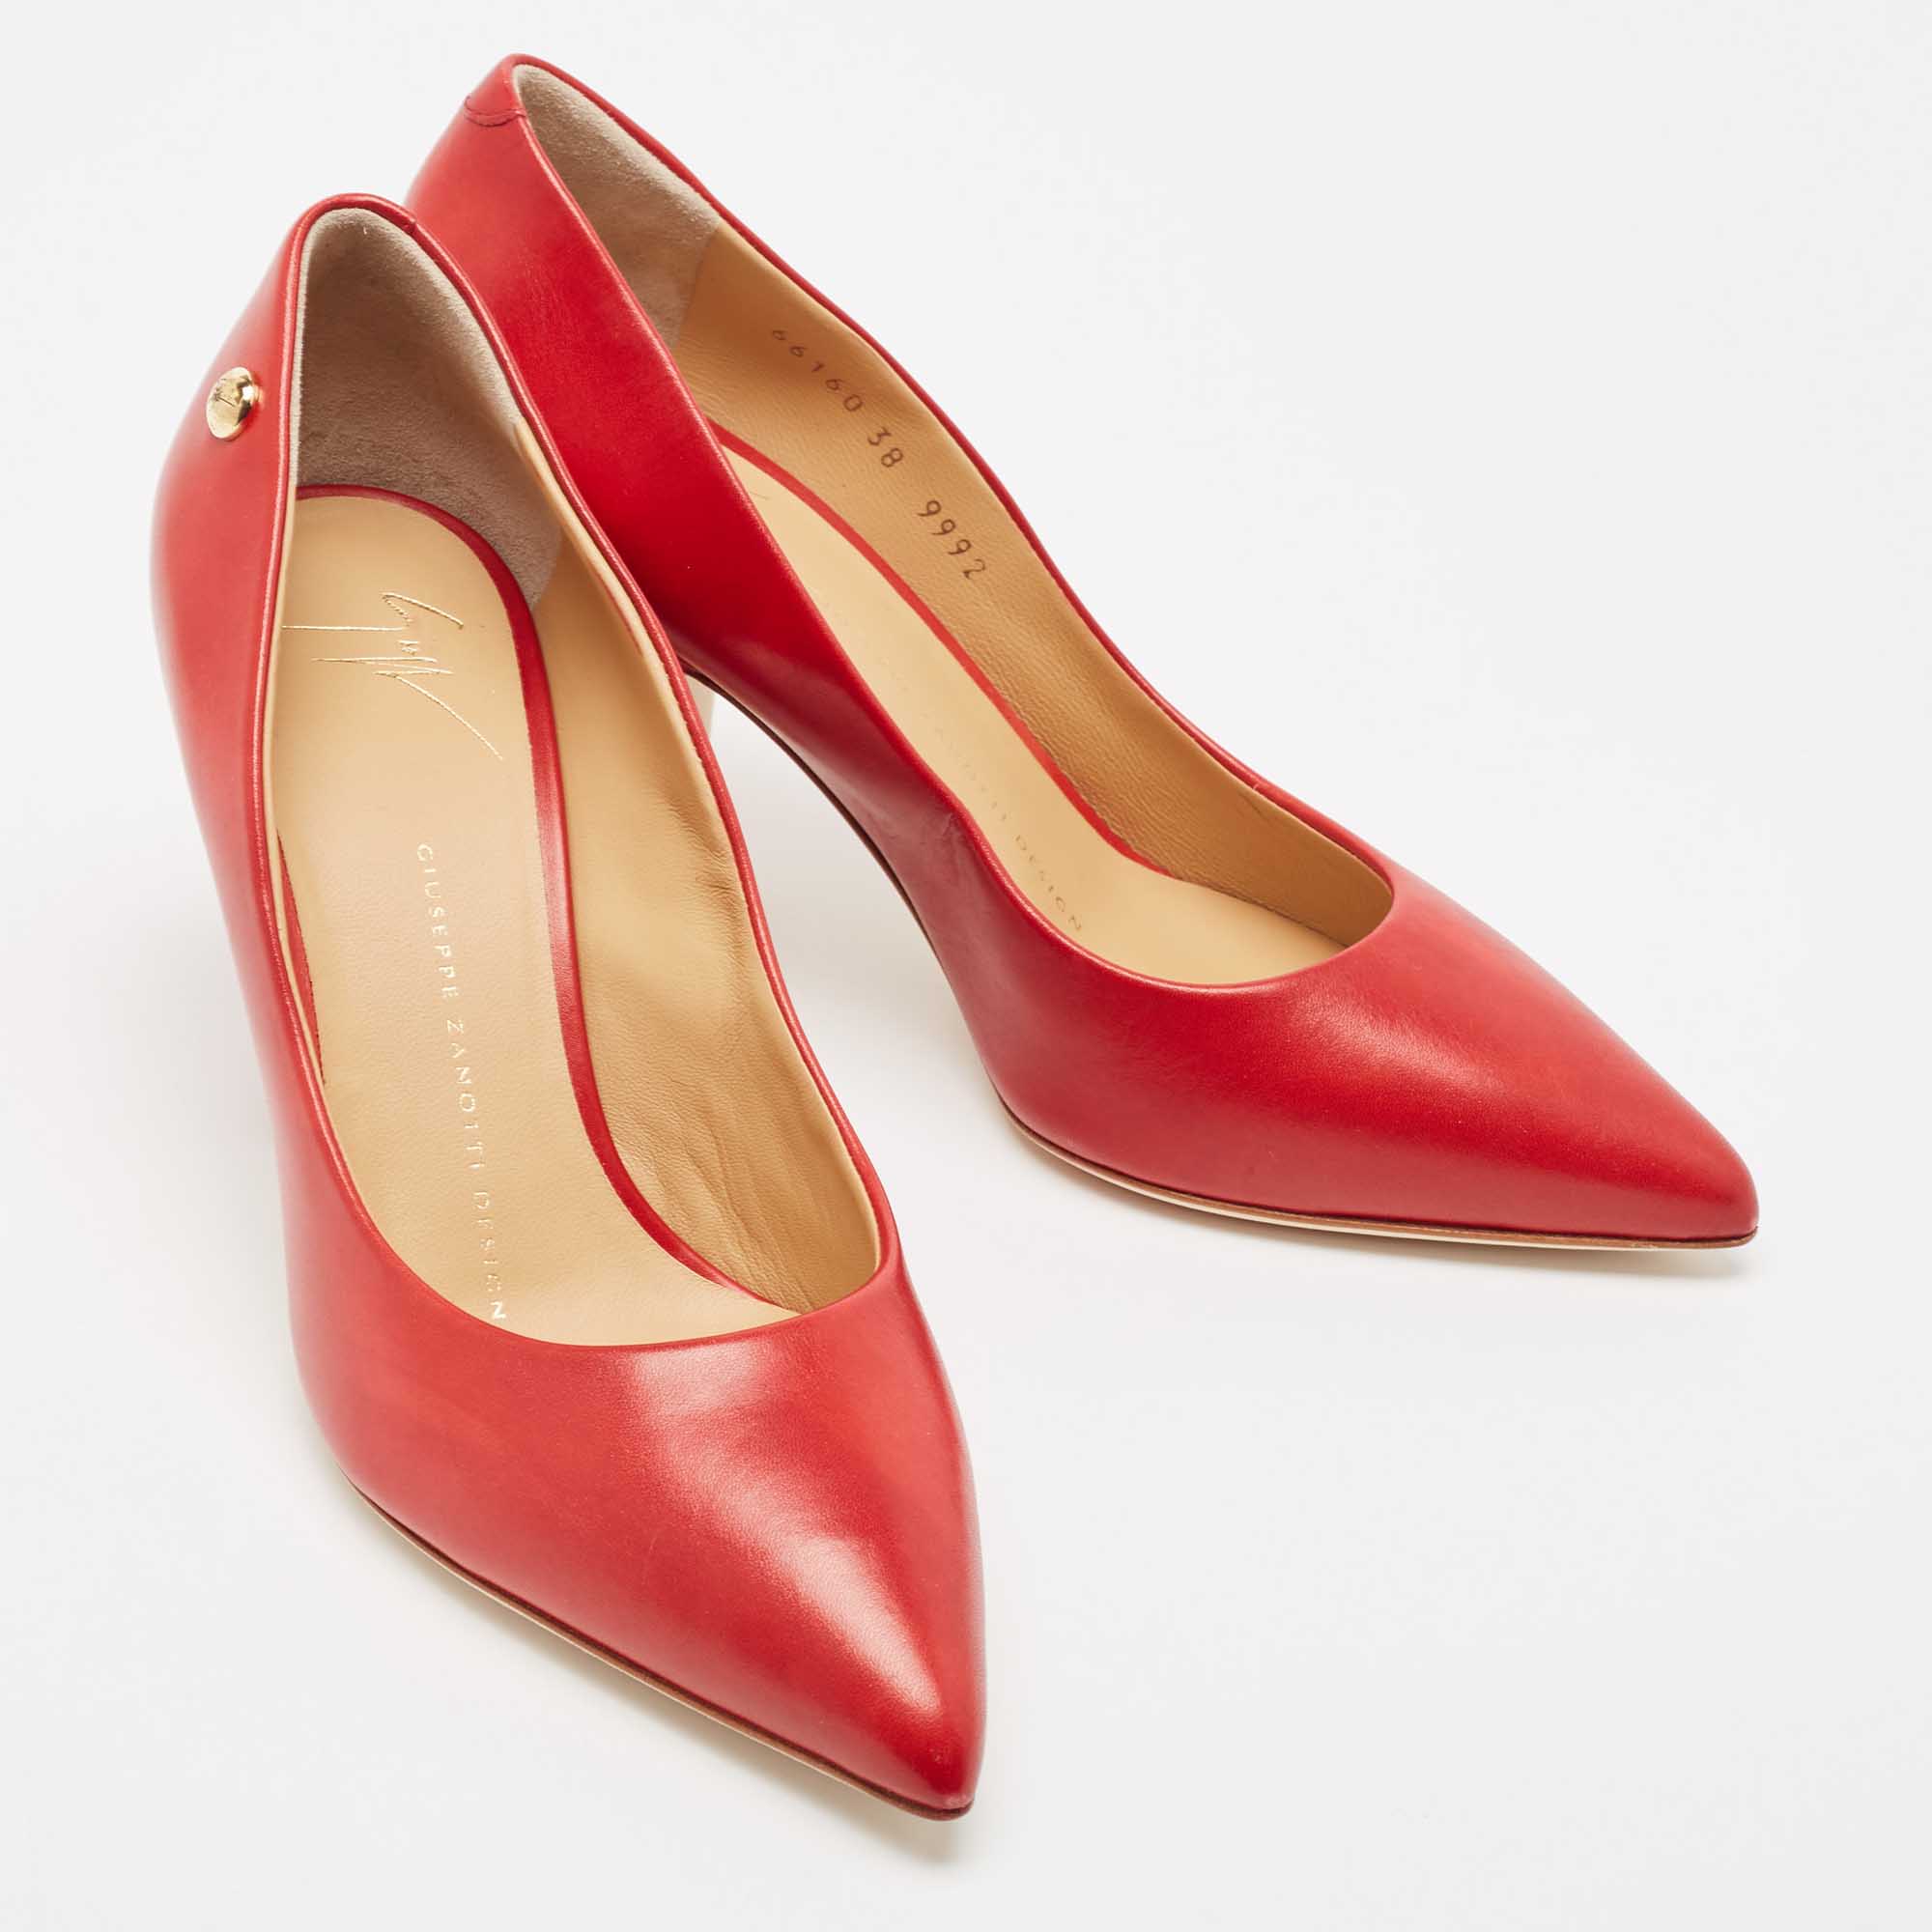 Giuseppe Zanotti Red Leather Pointed Toe Pumps Size 38